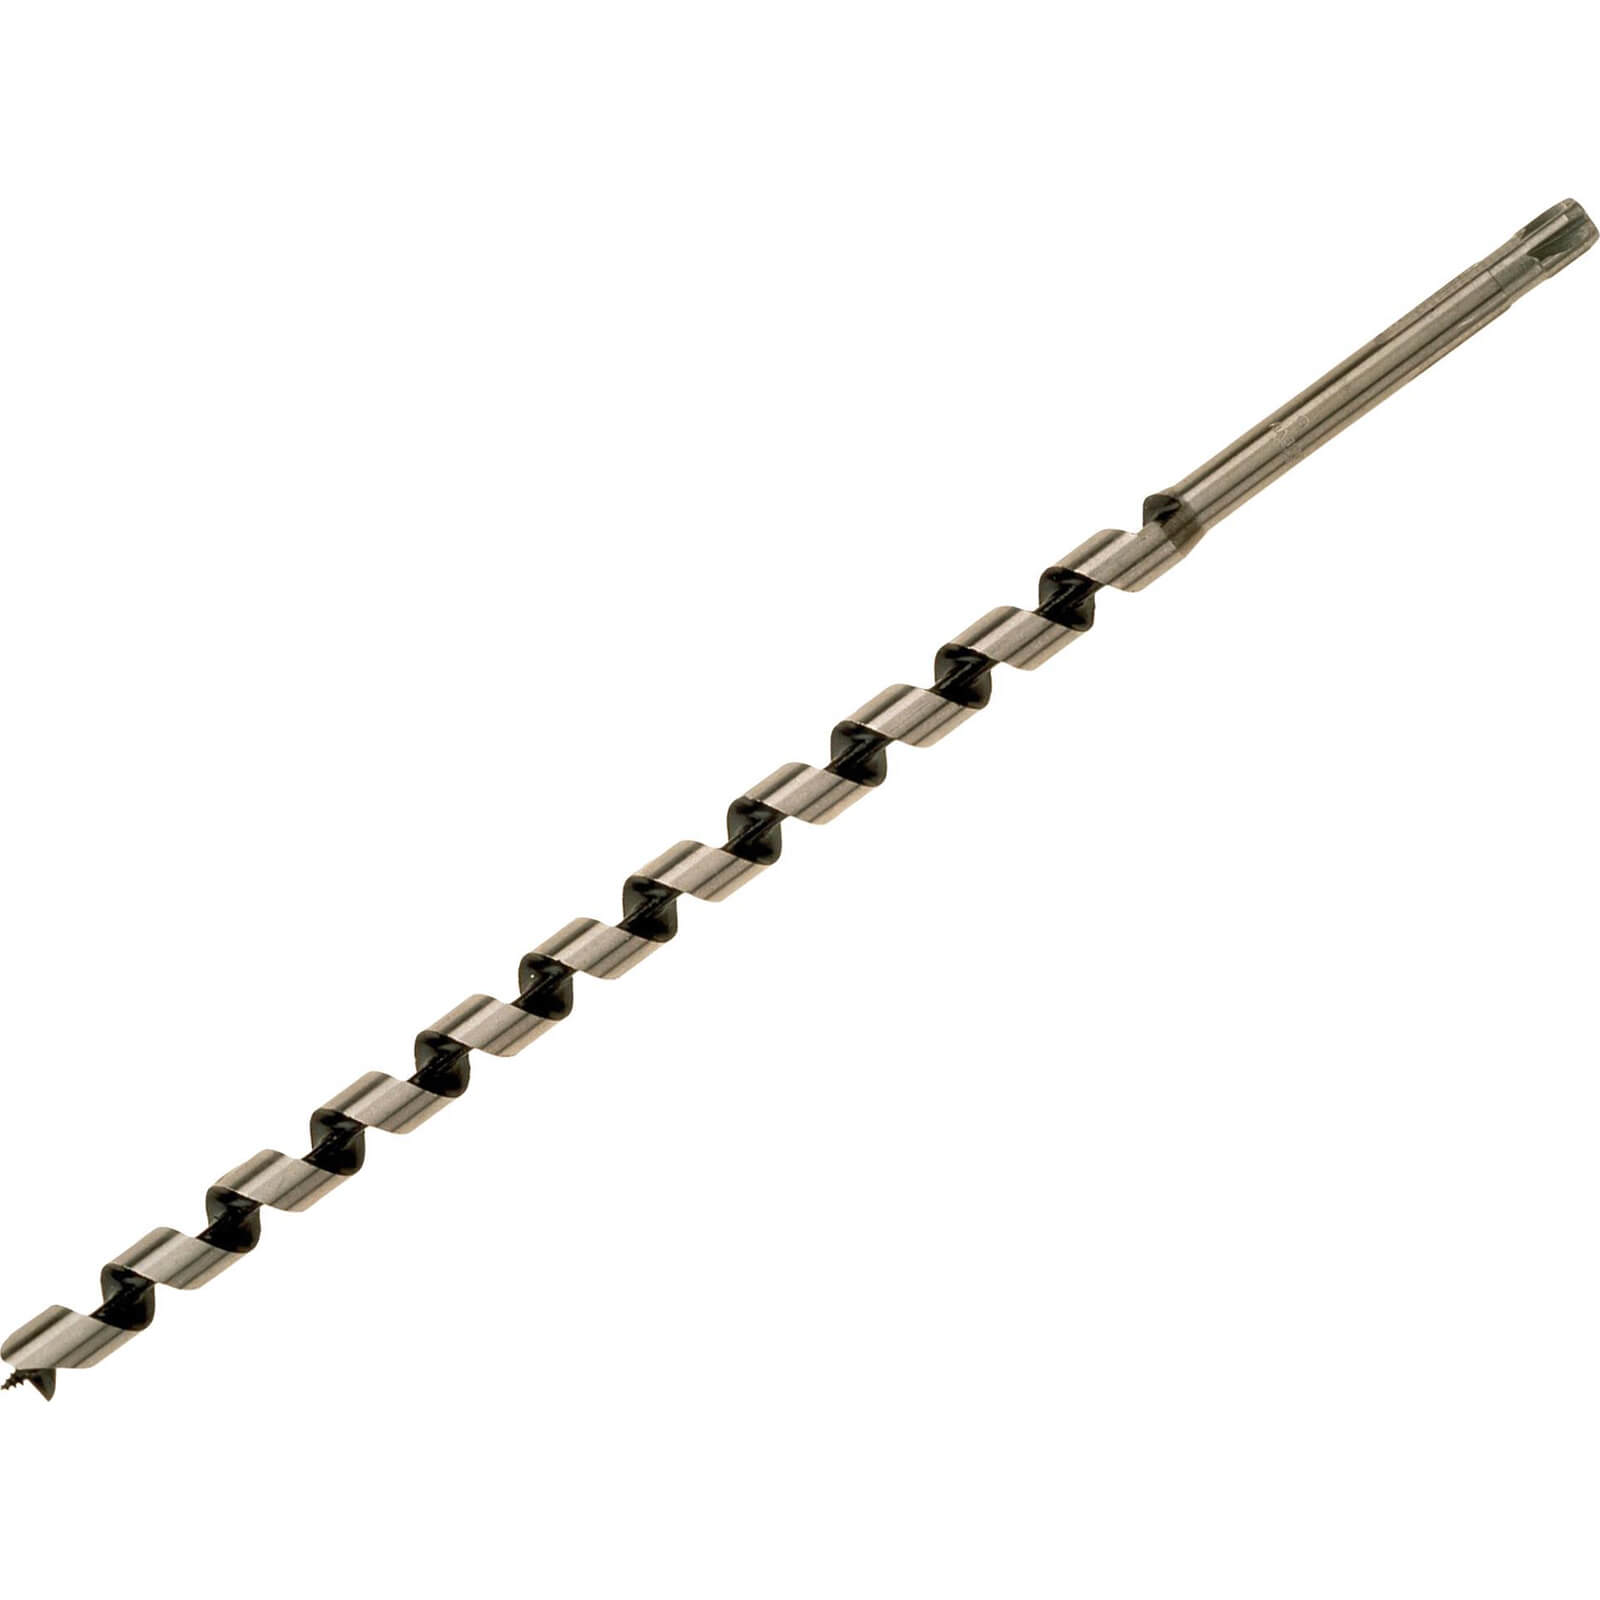 Photo of Bahco 9627 Series Long Combination Auger Drill Bit 16mm 460mm